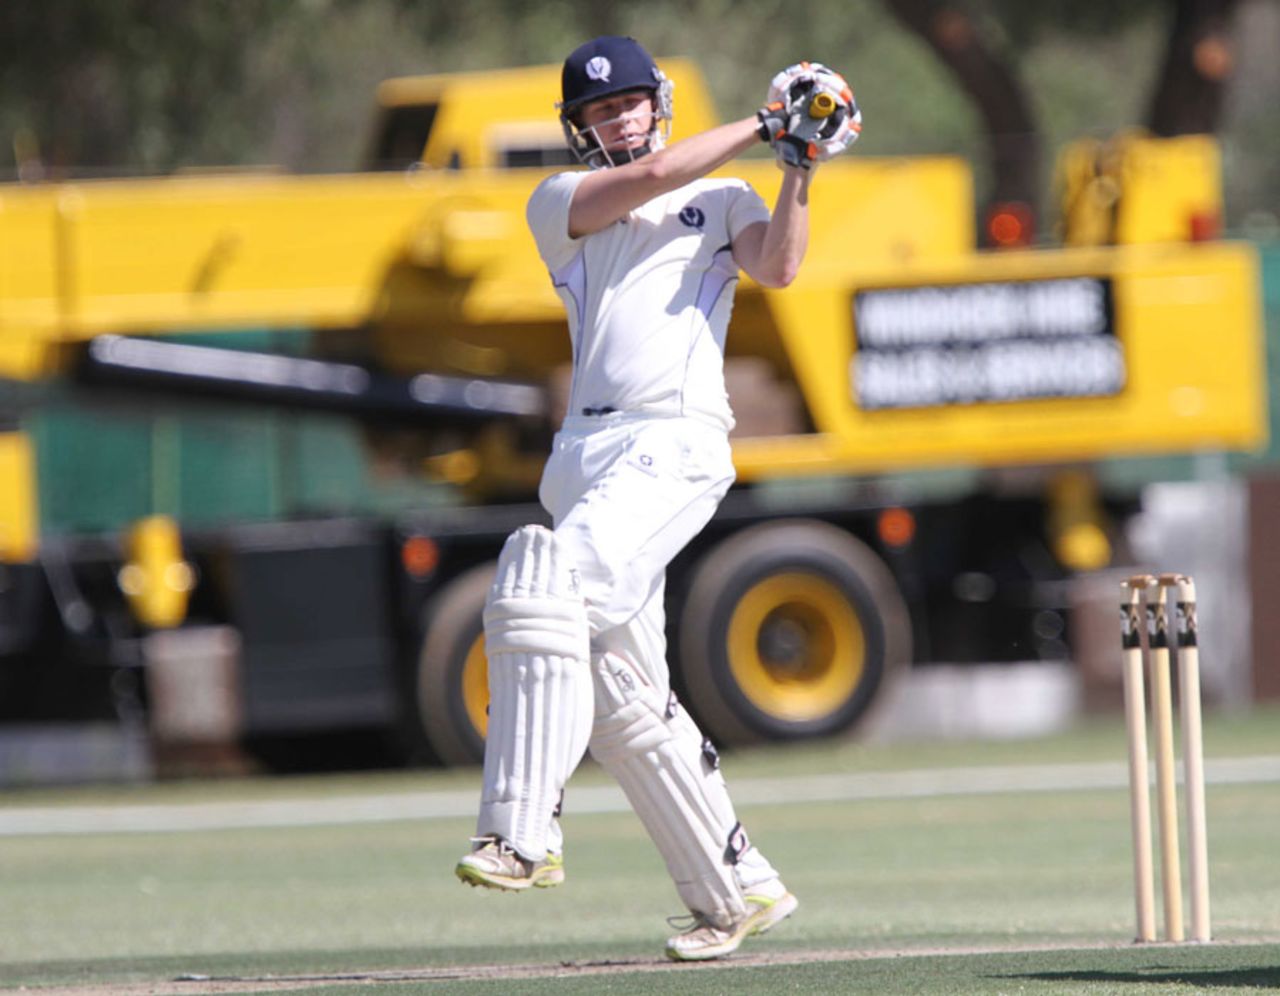 Ryan Flannigan pulls during his century, Namibia v Scotland, ICC Intercontinental Cup, Windhoek, 1st day, September 23 2011